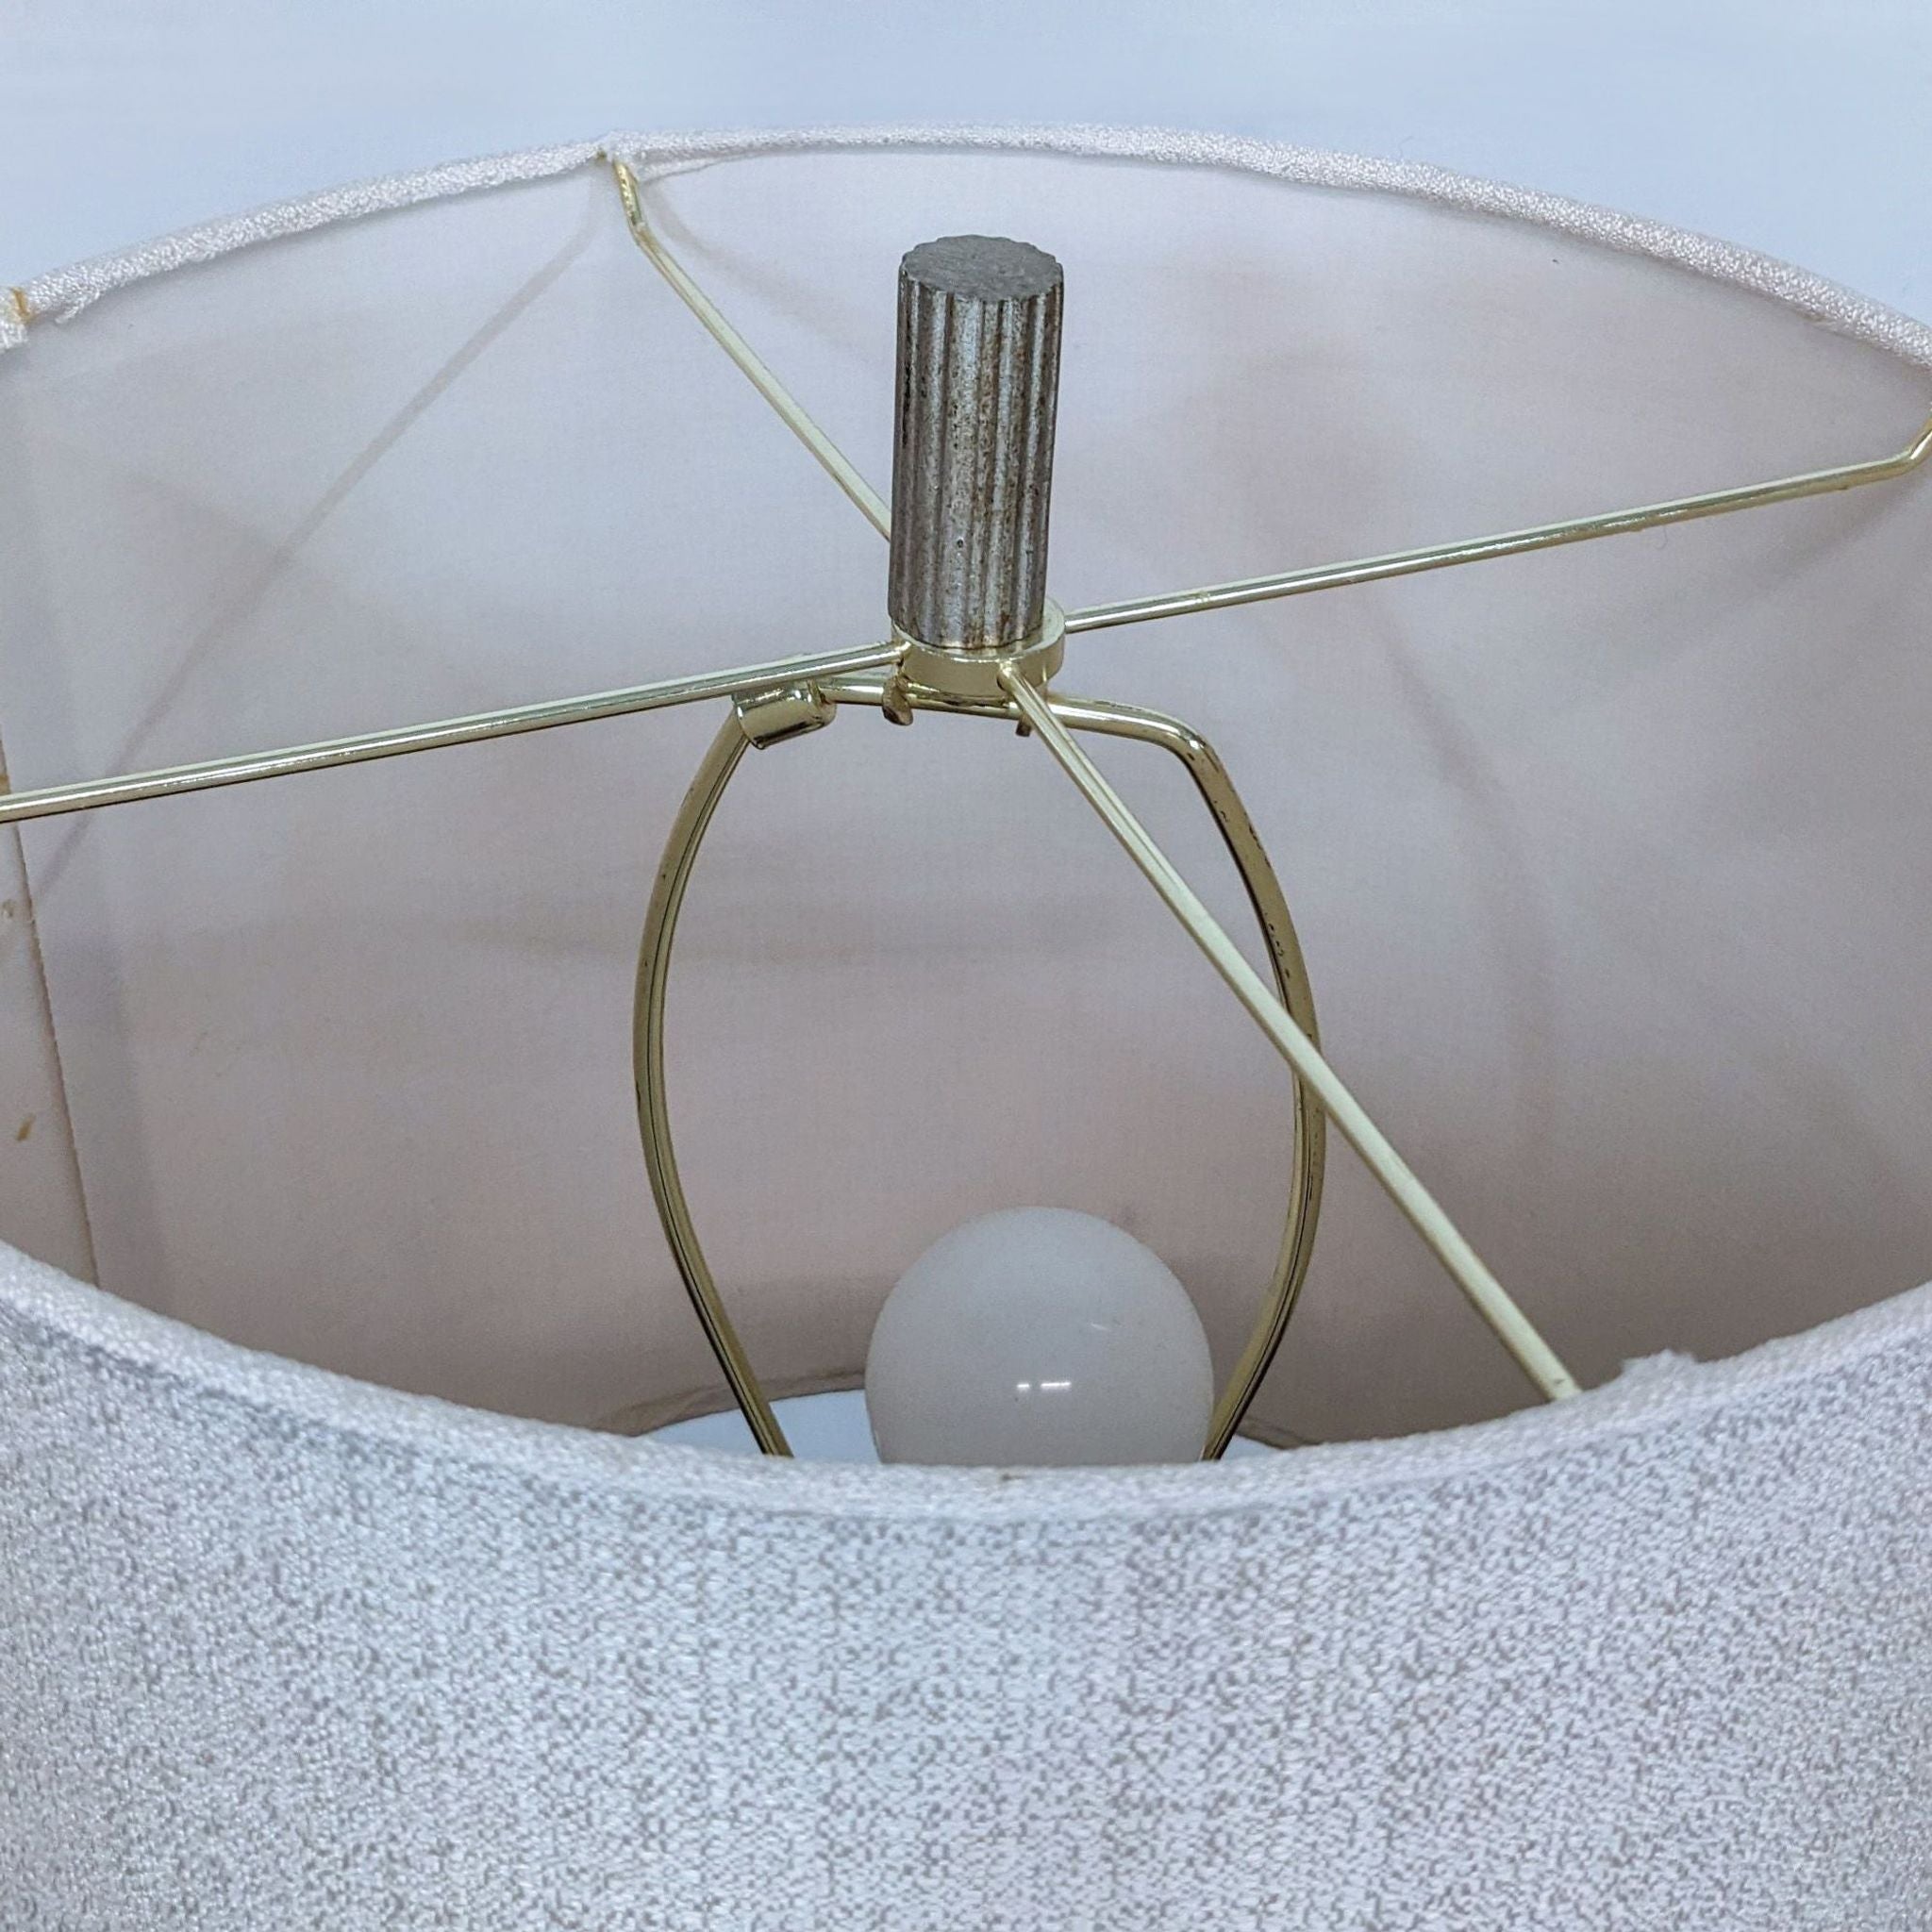 Close-up of a Reperch table lamp's metal structure and bulb under the white fabric shade, showing design details.